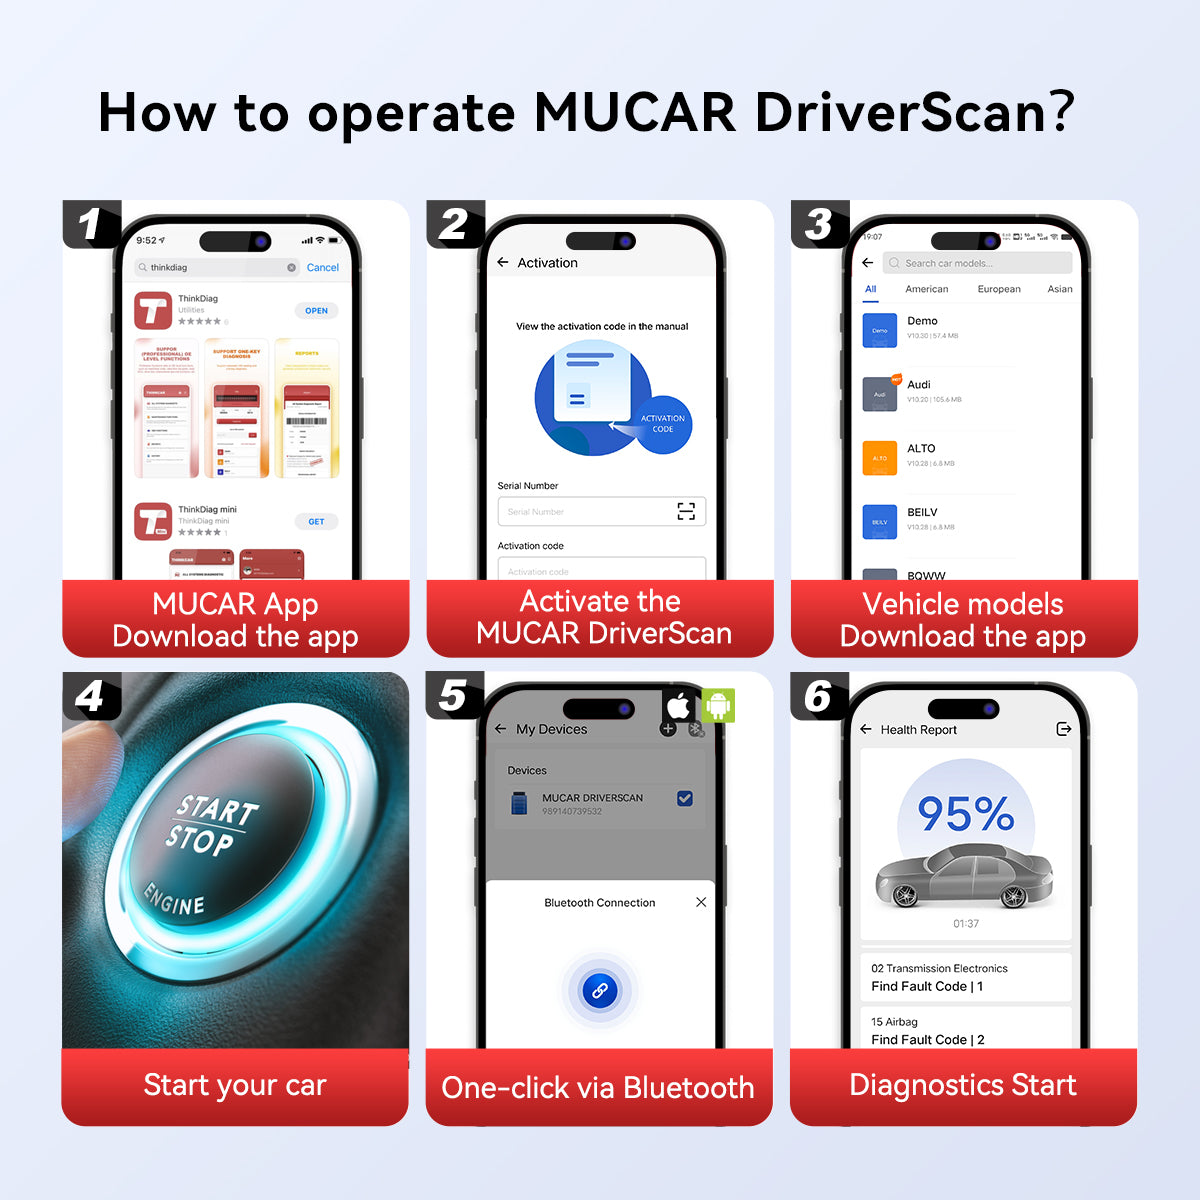 How to operate MUCAR DriverScan?